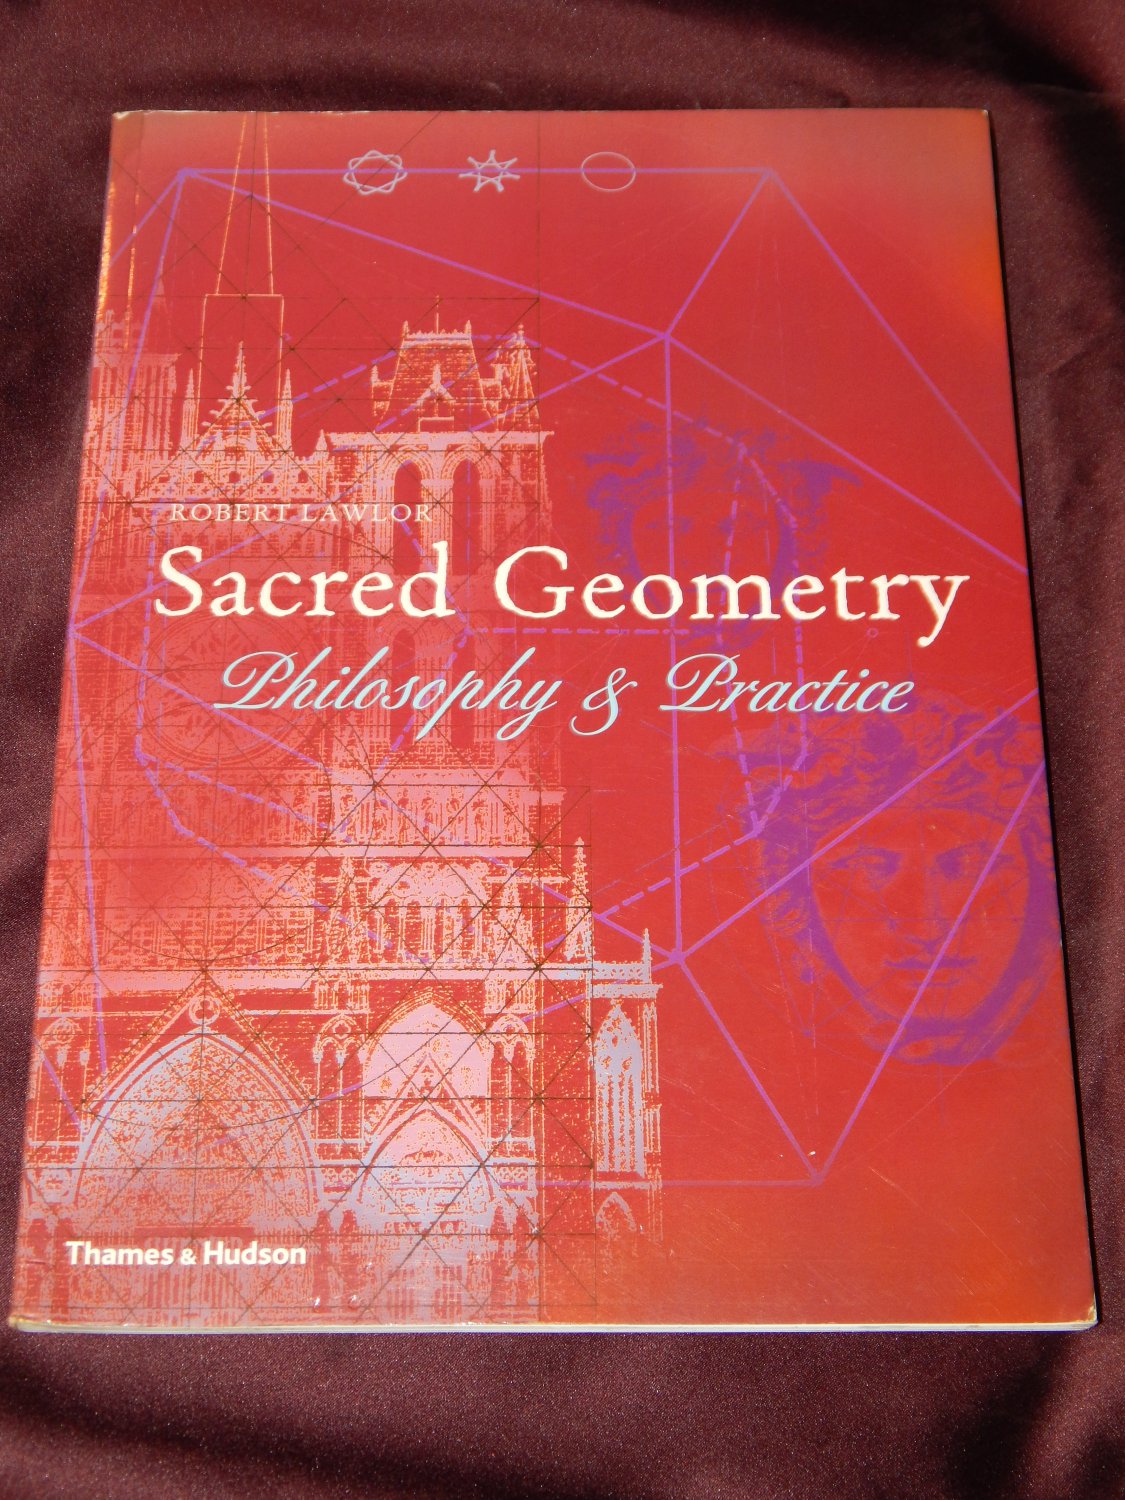 Sacred Geometry: Philosophy & Practice -- USED BOOK in Good Condition